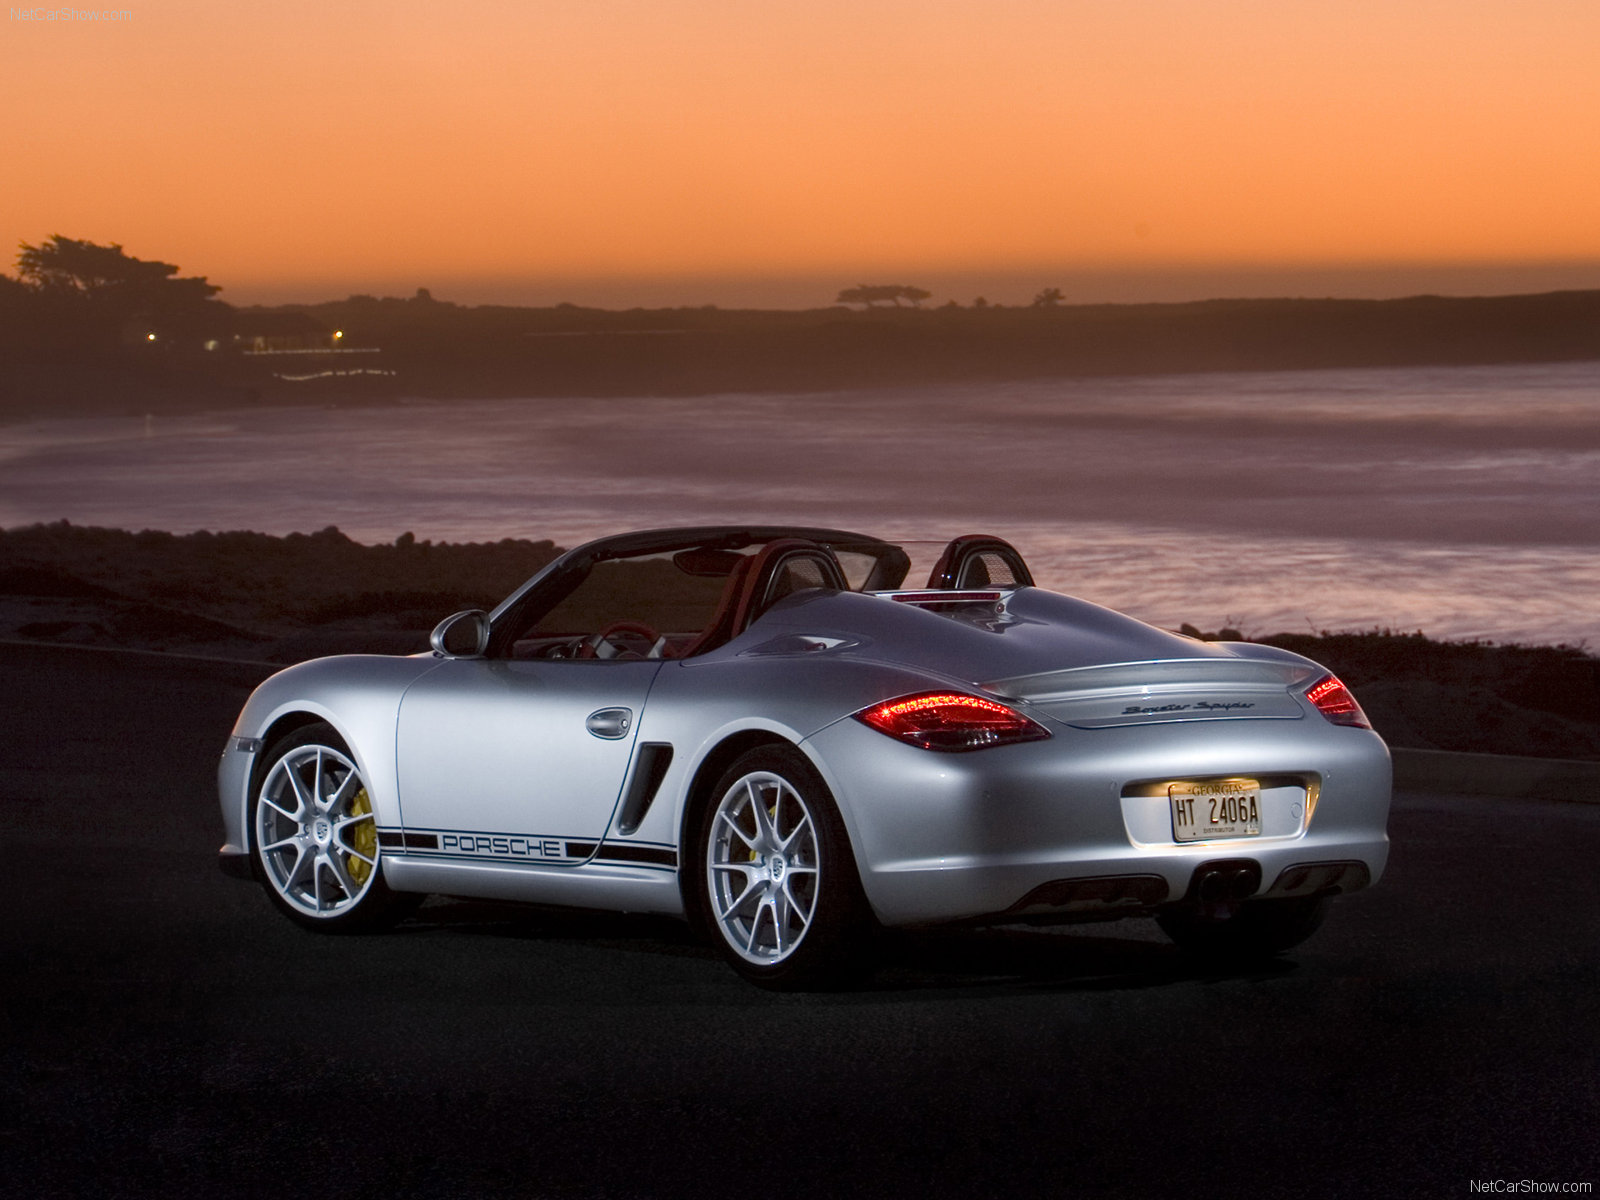 You can vote for this Porsche Boxster Spyder photo